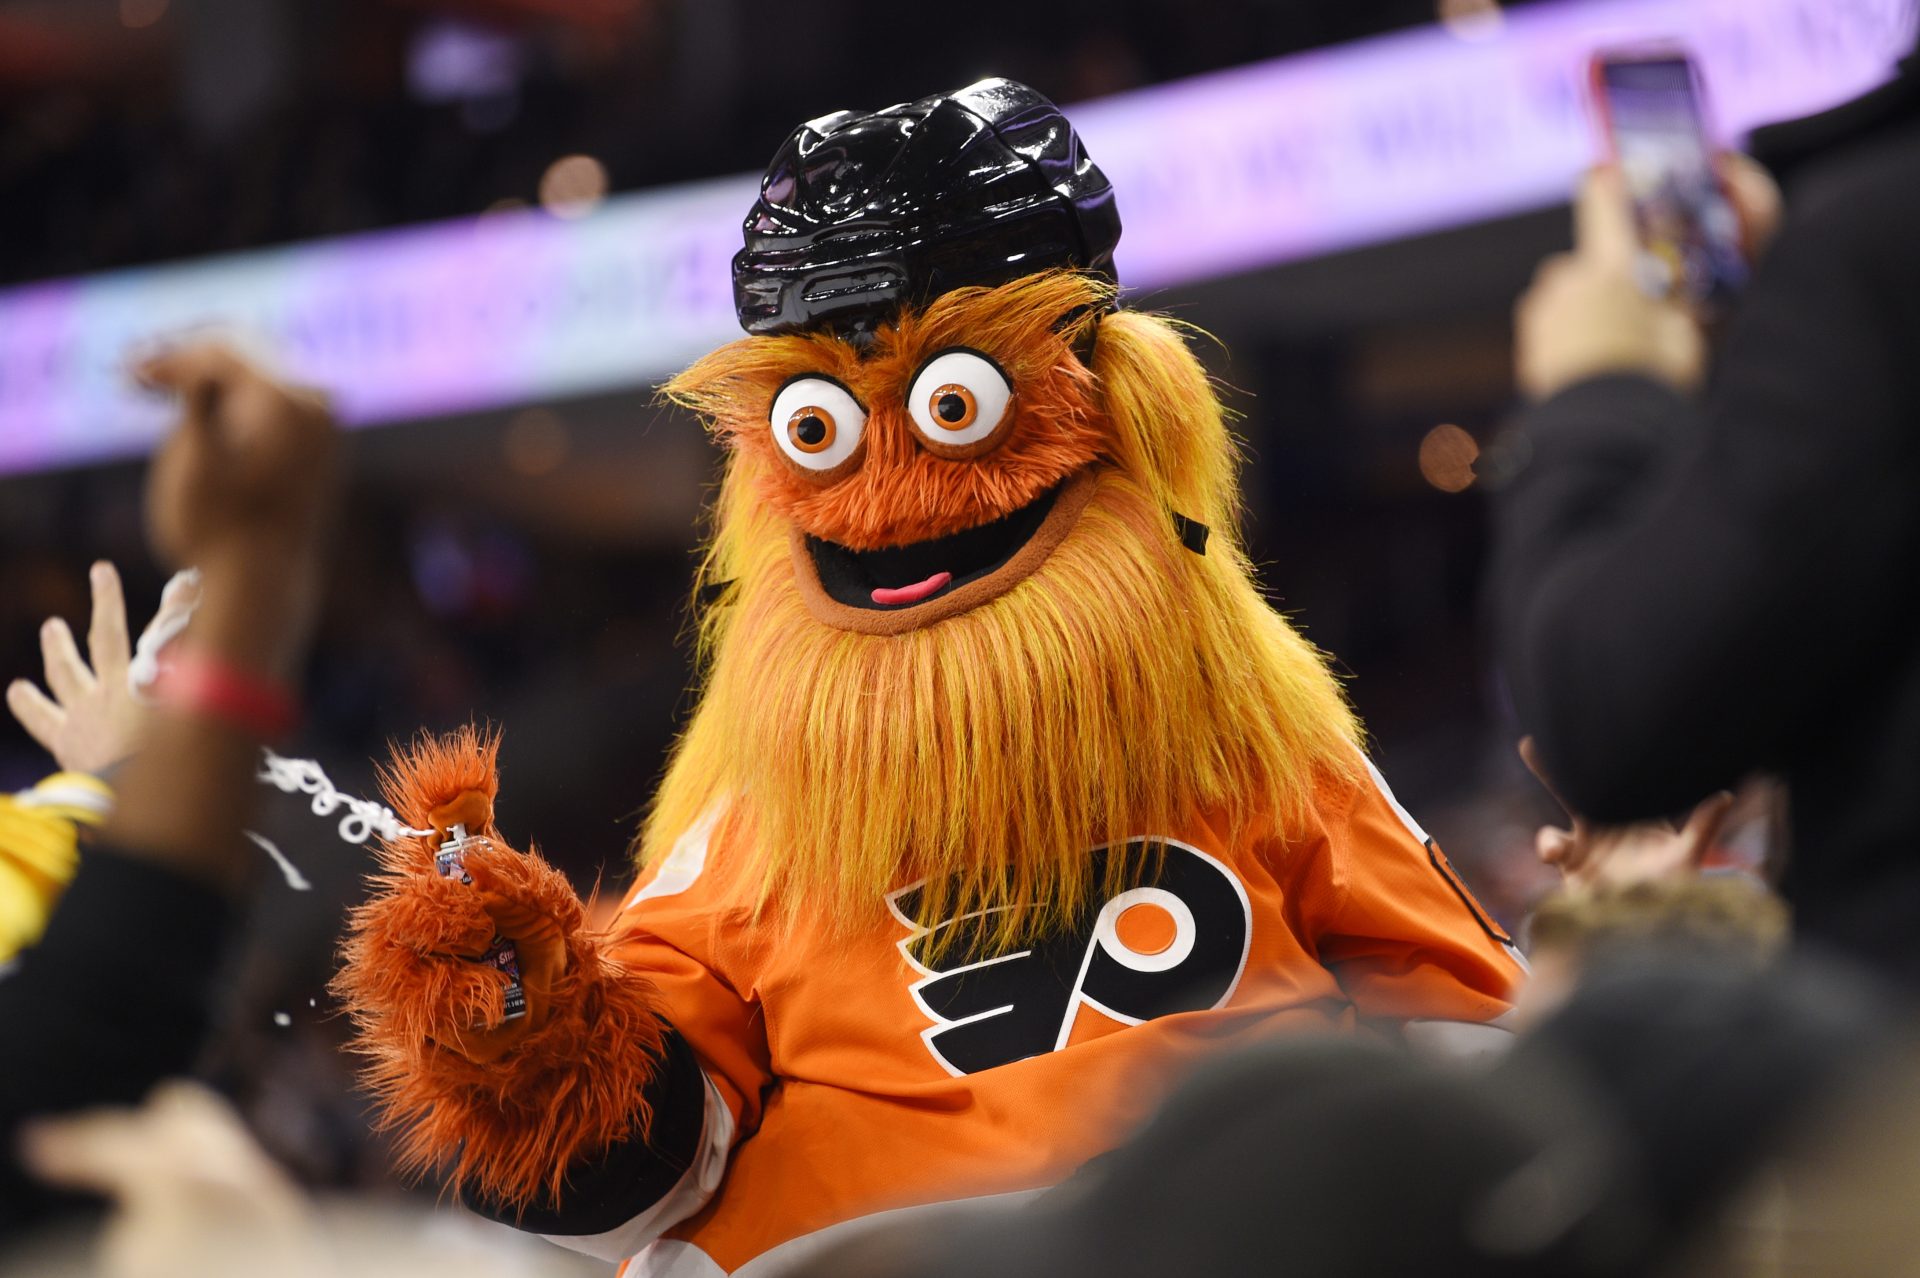 In this Monday, Jan. 13, 2020 file photo, the Philadelphia Flyers' mascot, Gritty, performs during an NHL hockey game in Philadelphia.